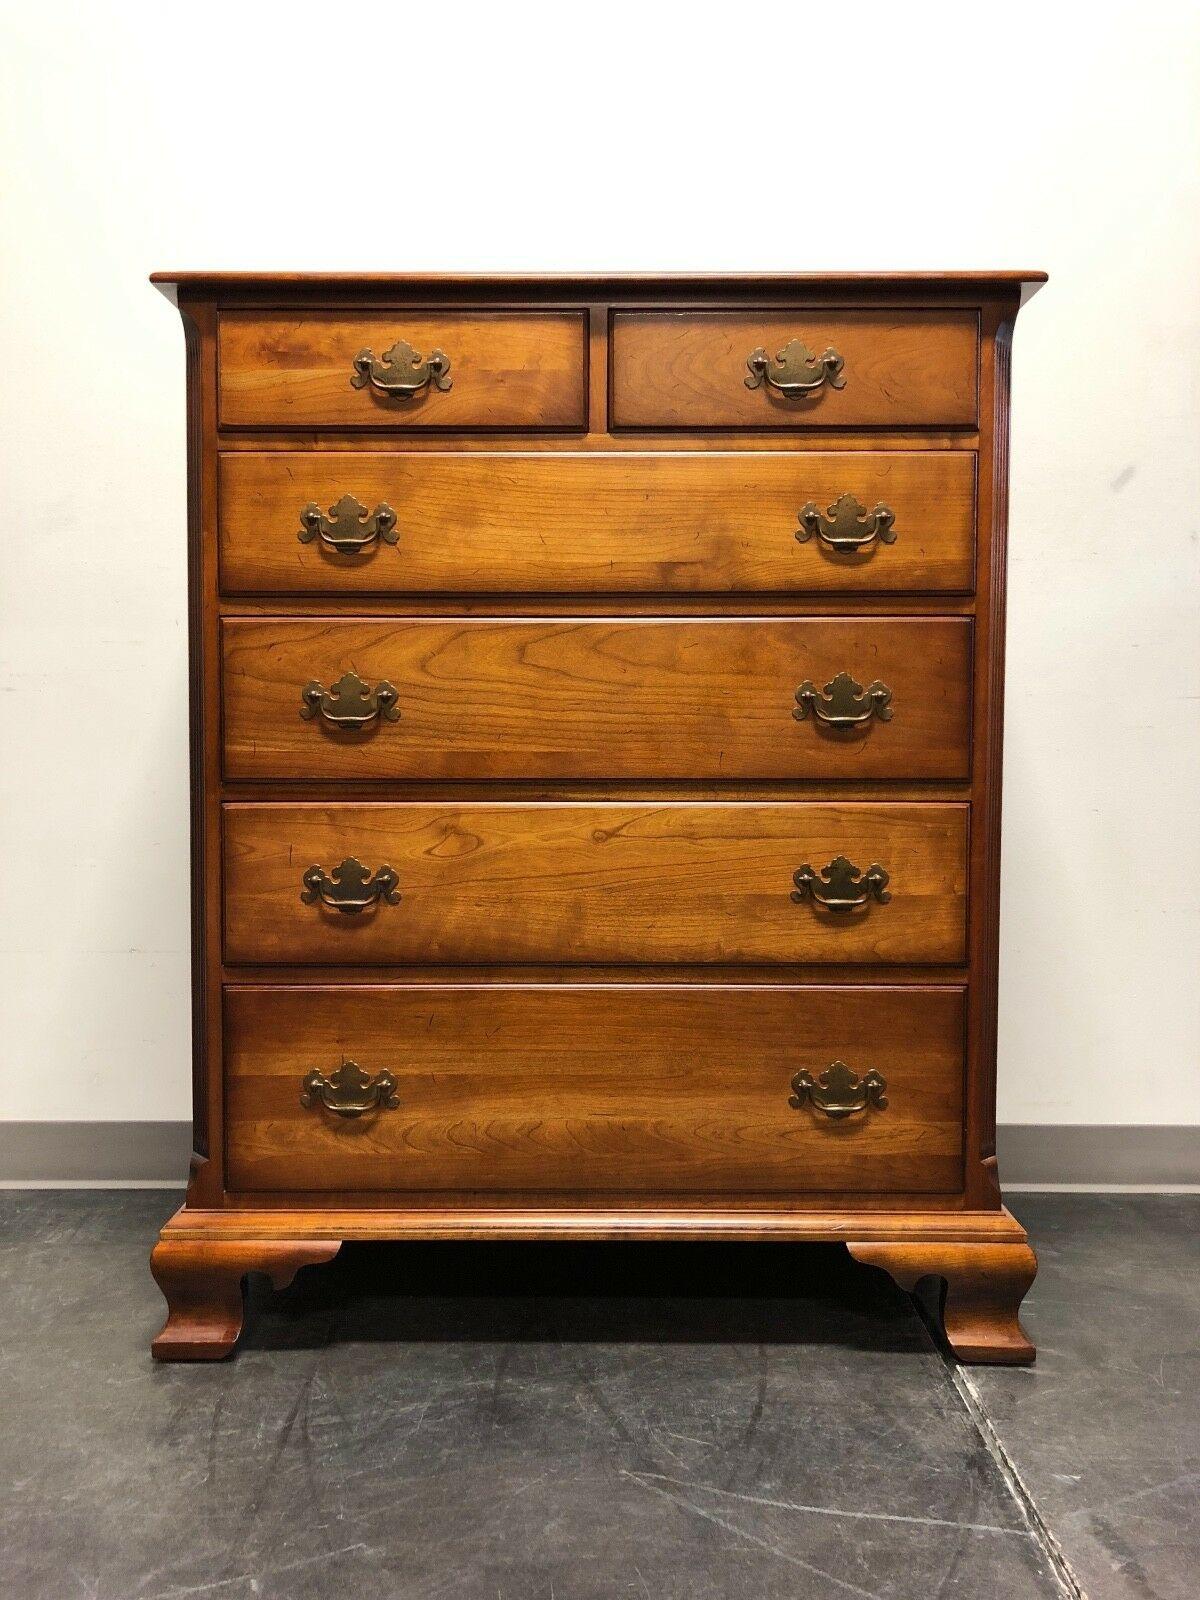 CHERRY HILL COLLECTION Cherry Chippendale Chest of Drawers w/ Fluted Columns 8